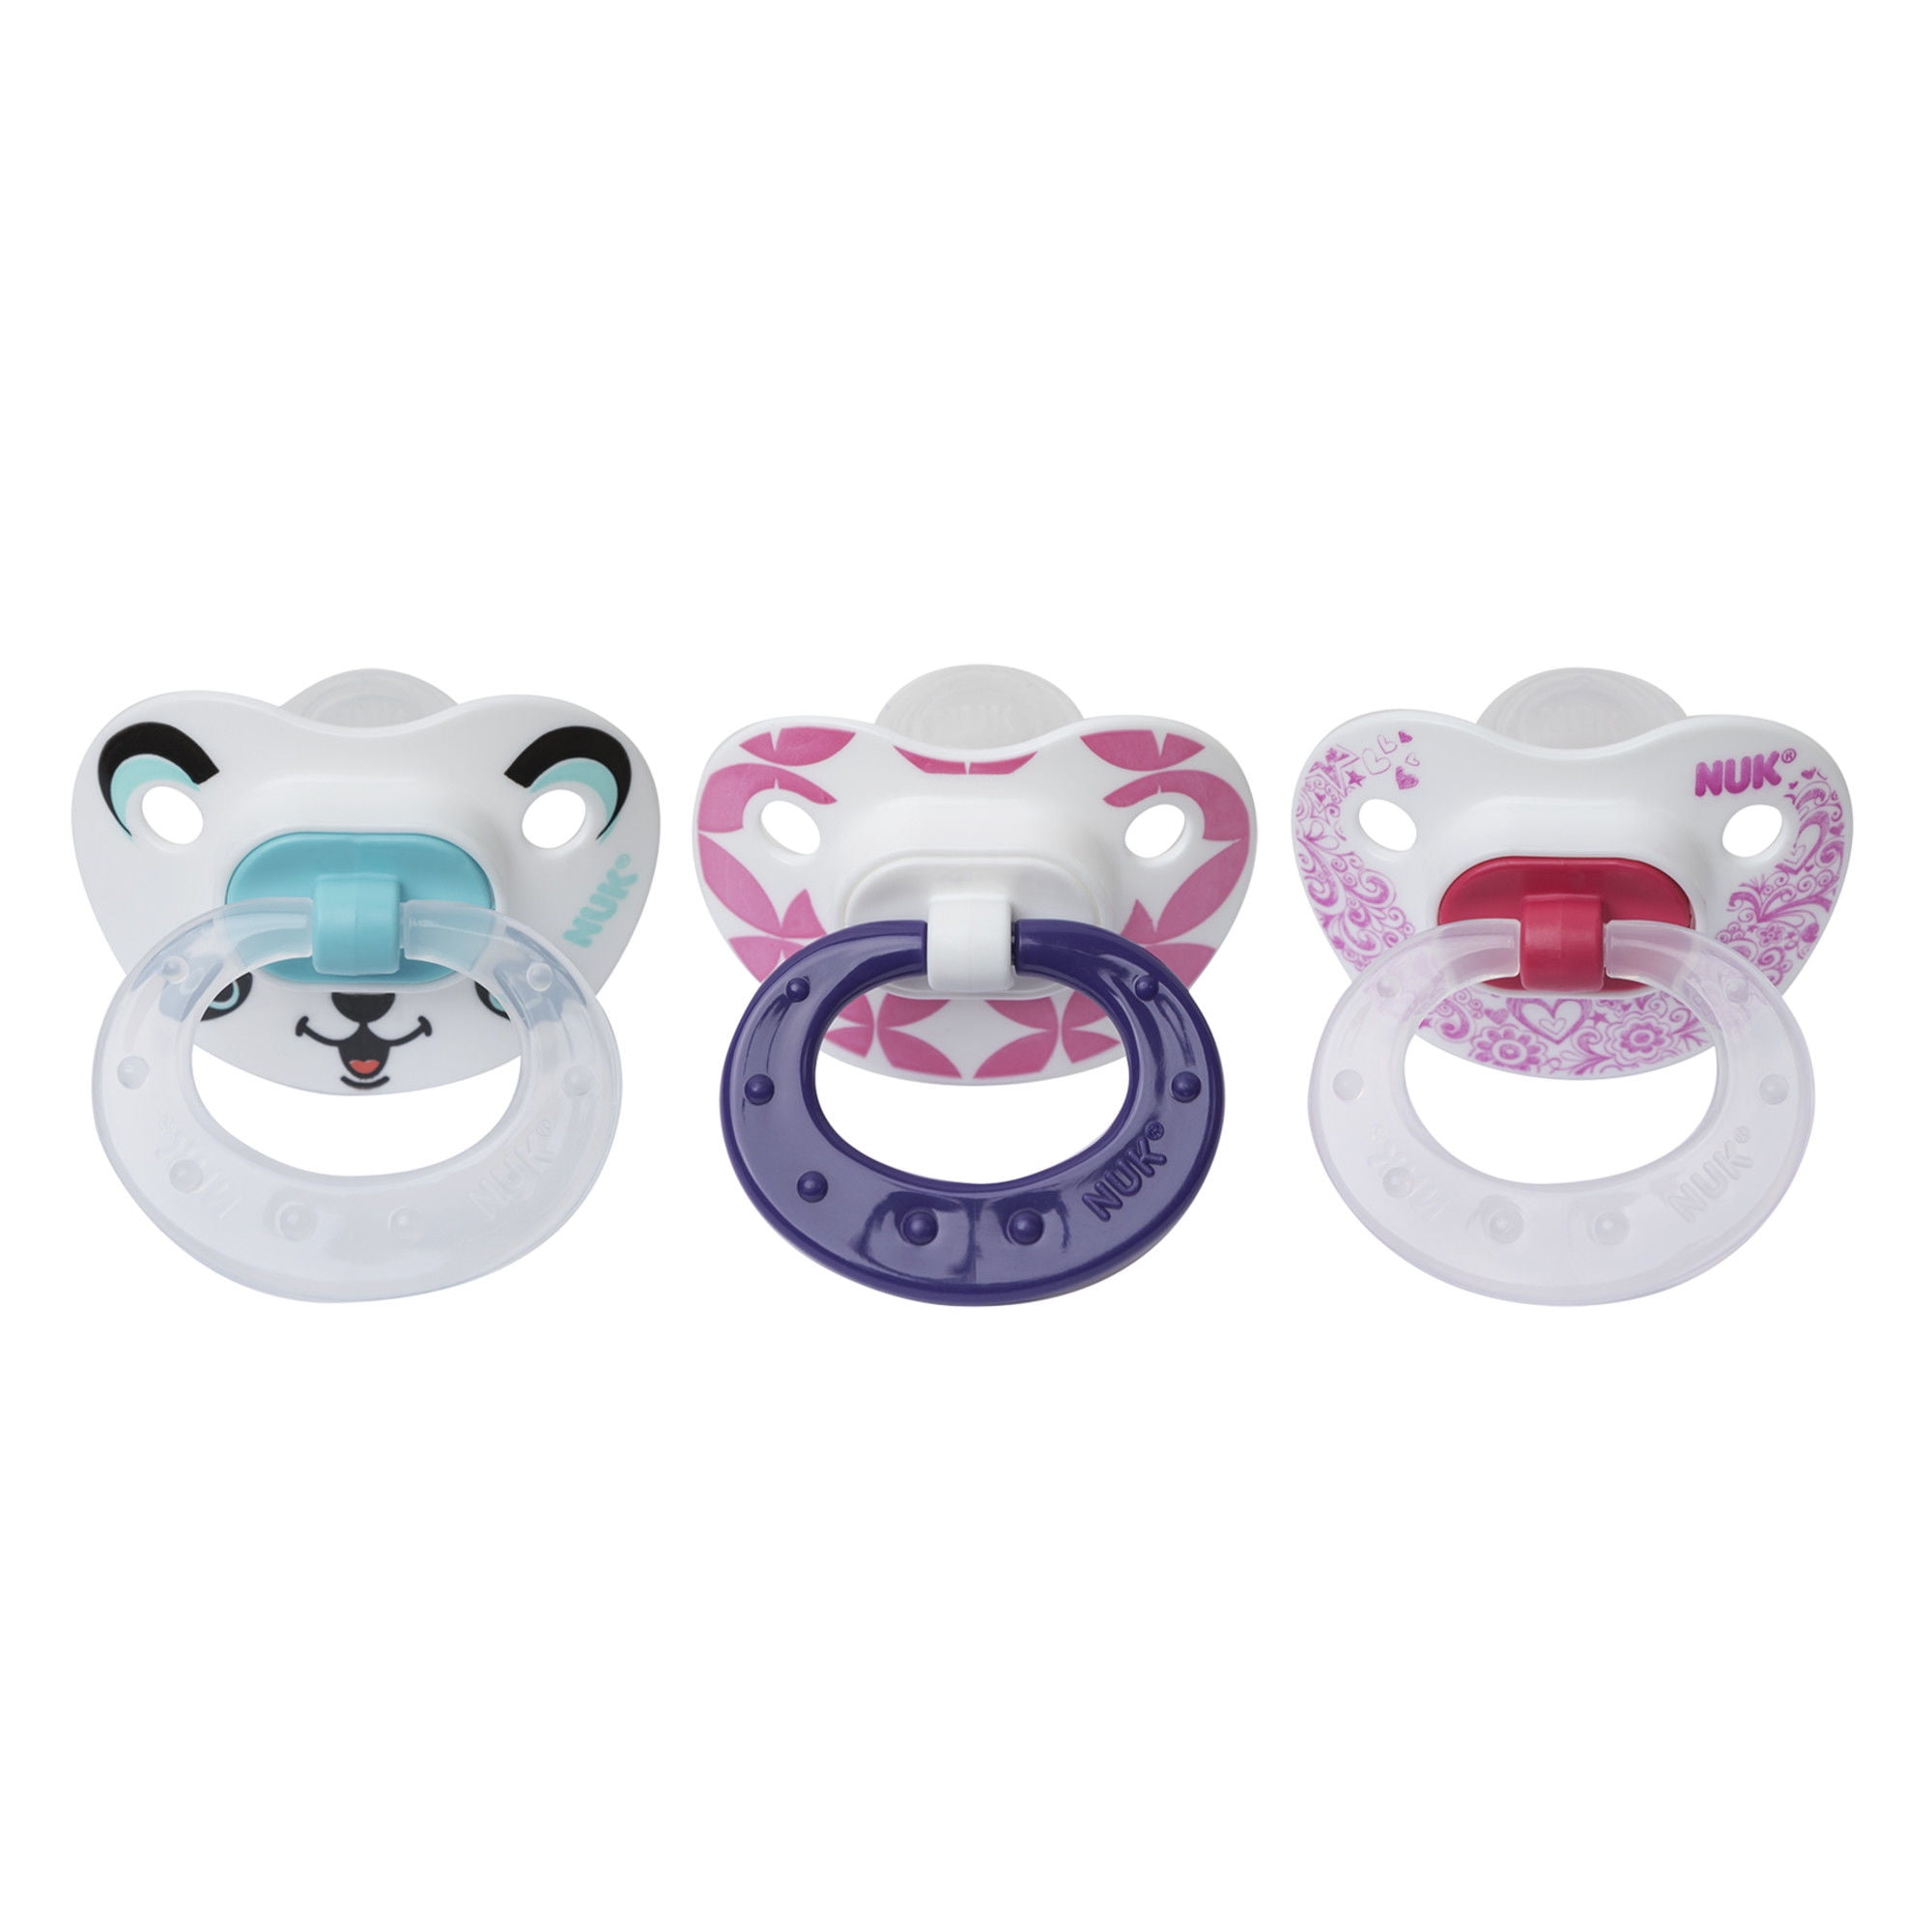 Nuk 62814 6-18 Months Tye Dye Silicone Orthodontic Pacifier 2 Count Girl Colors 